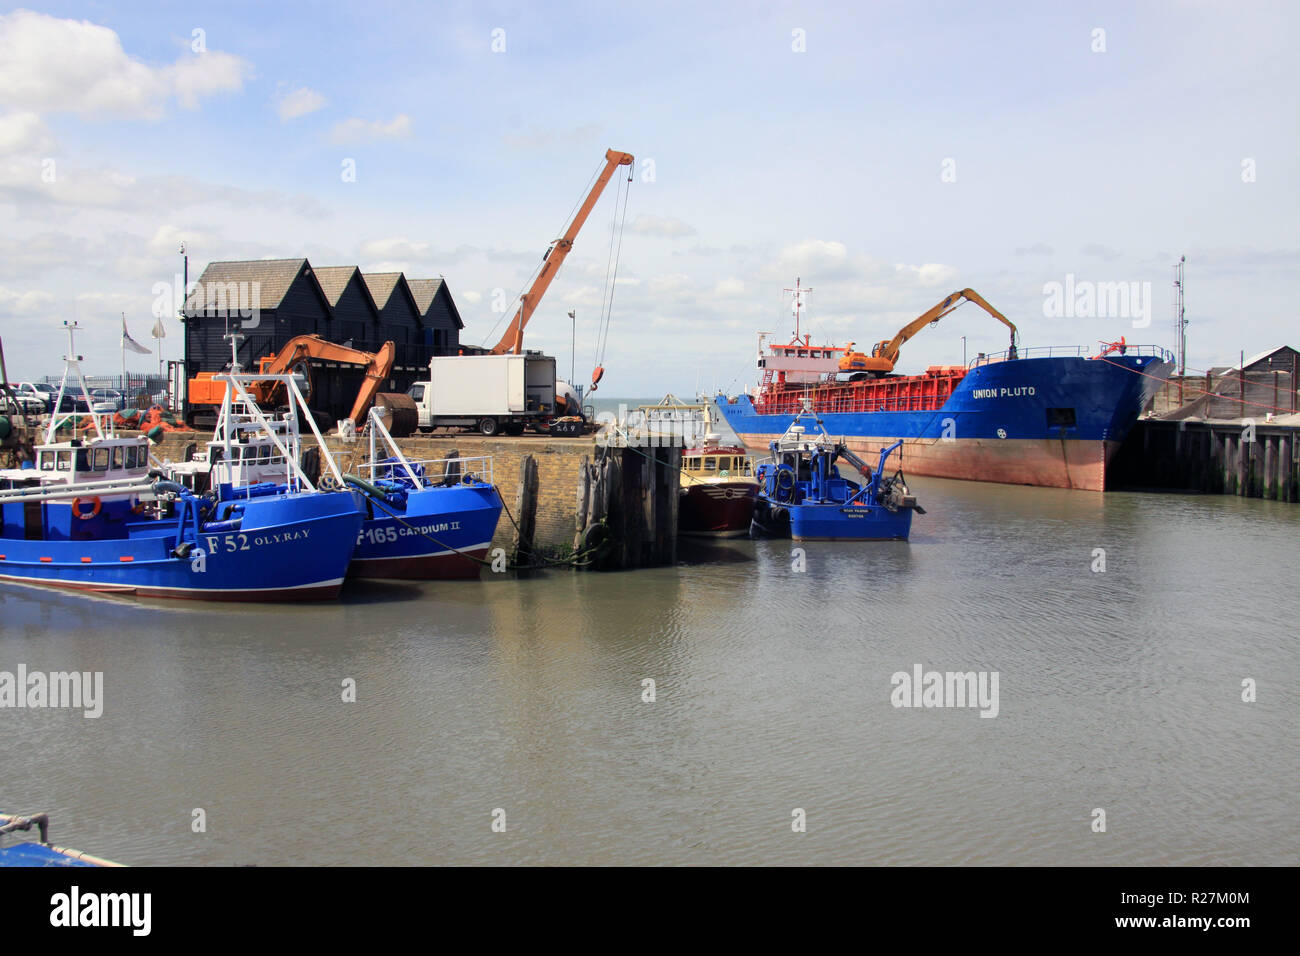 Fishing boats in the harbour at the Kent resort of Whitstable  a seaside town on the north coast of Kent England UK Stock Photo